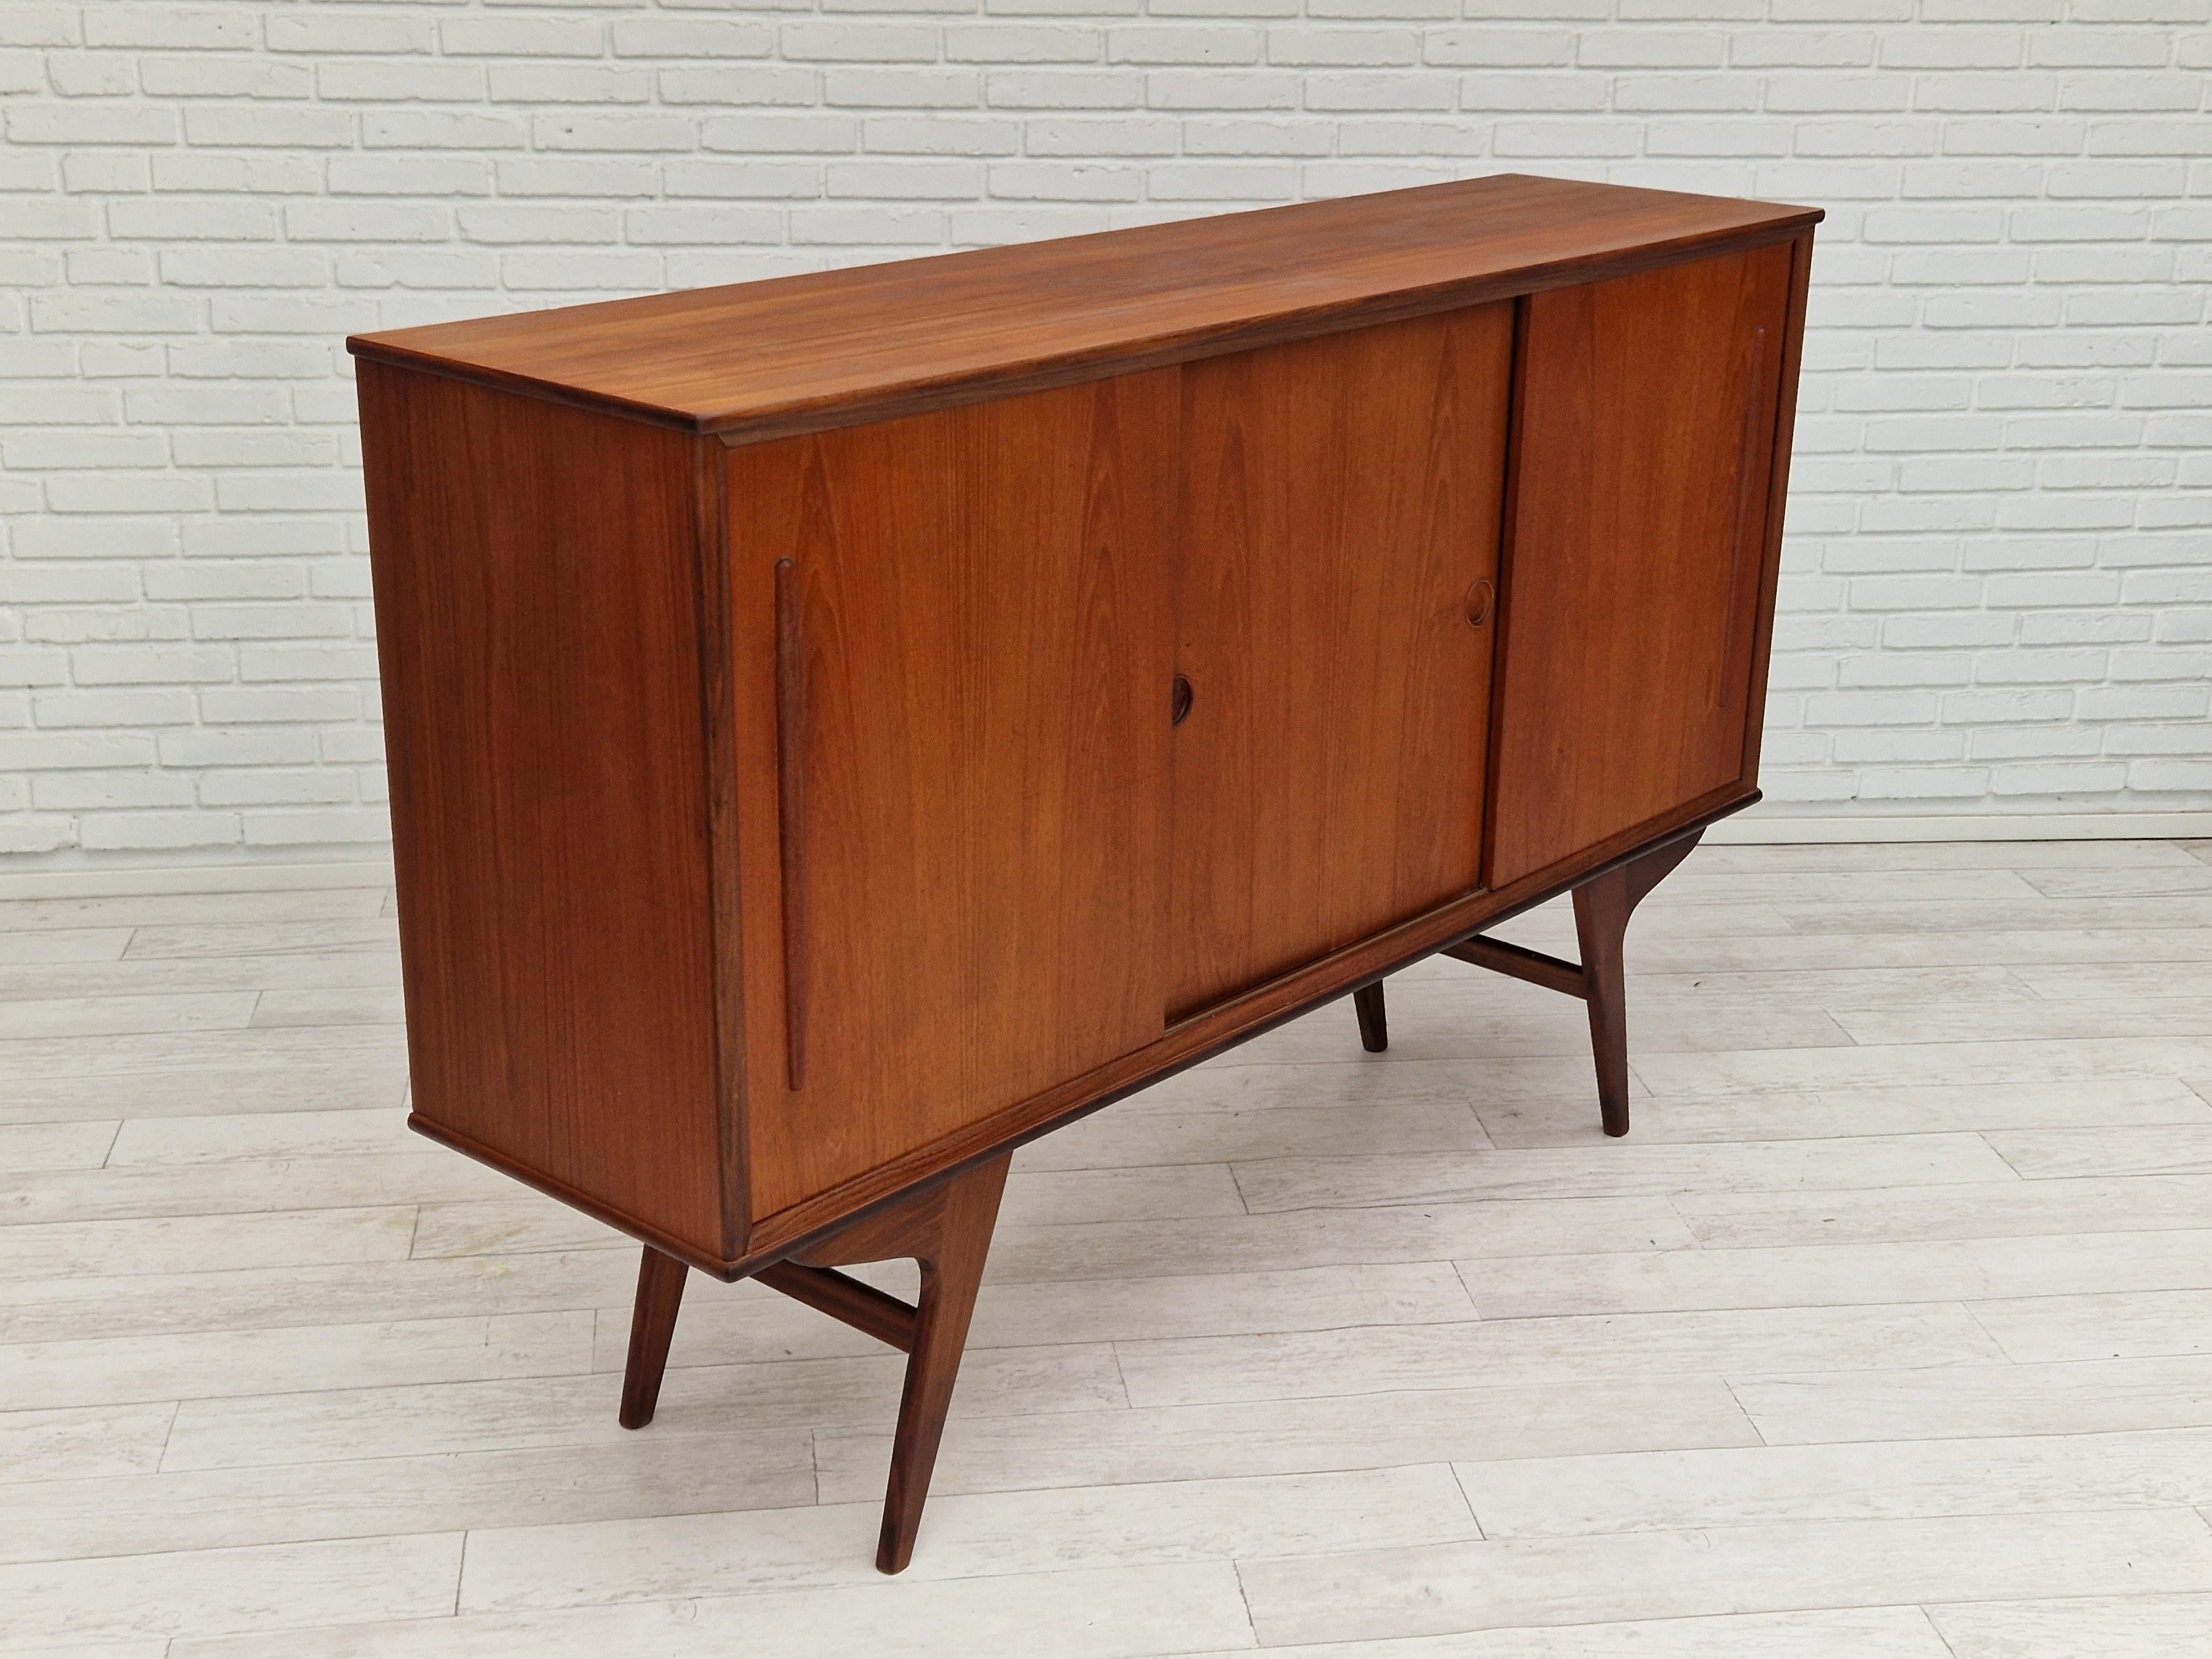 Vintage Danishcabinet-chest, teak wood. Sliding doors, drawers, mirror inside. No smells, no stains. Very good condition.